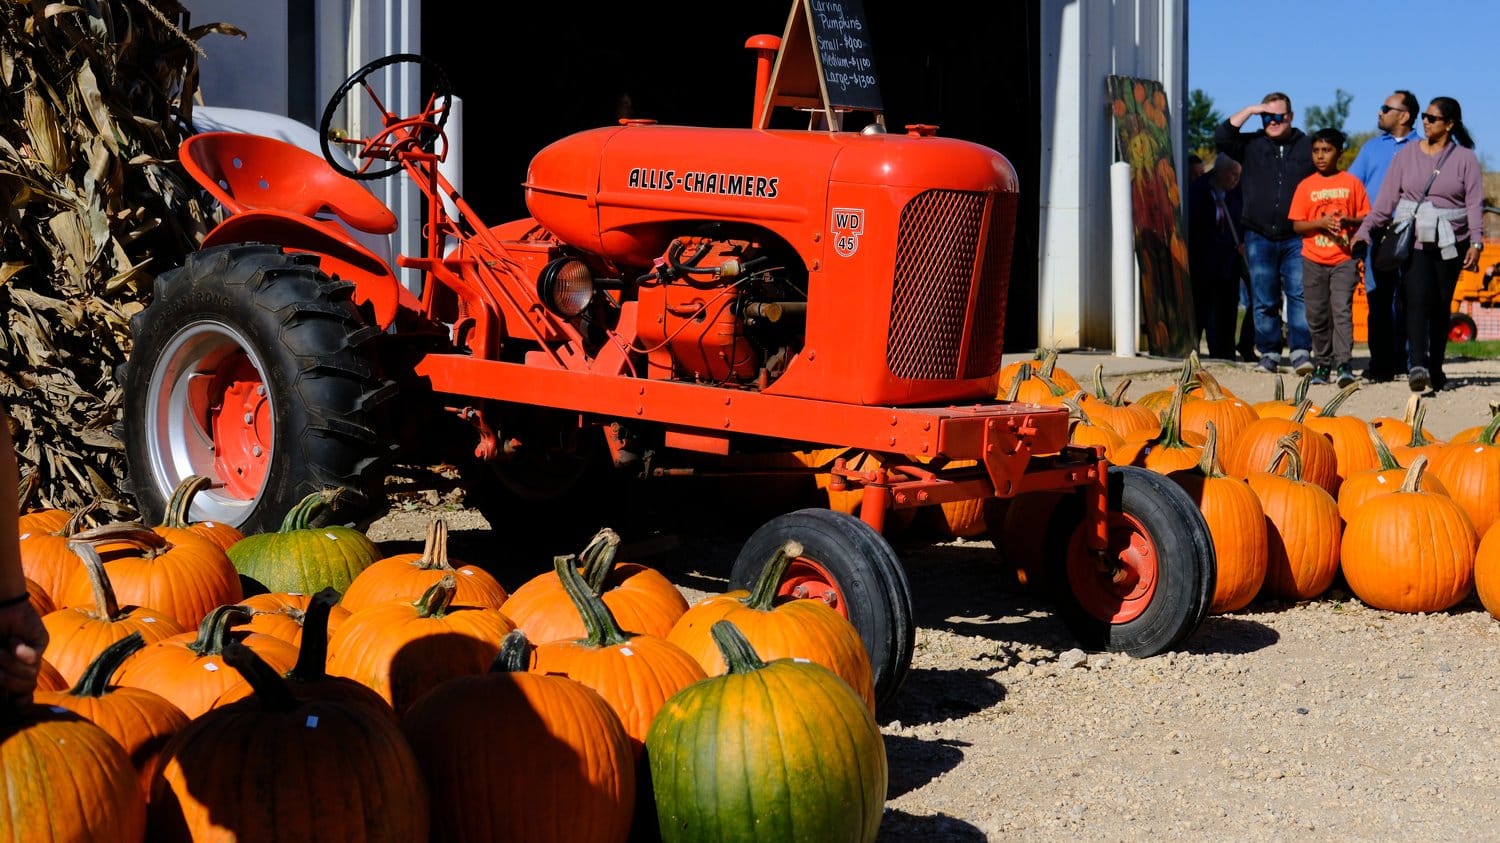 Antique Allis-Chalmers WD45 tractor surrounded by pumpkins.